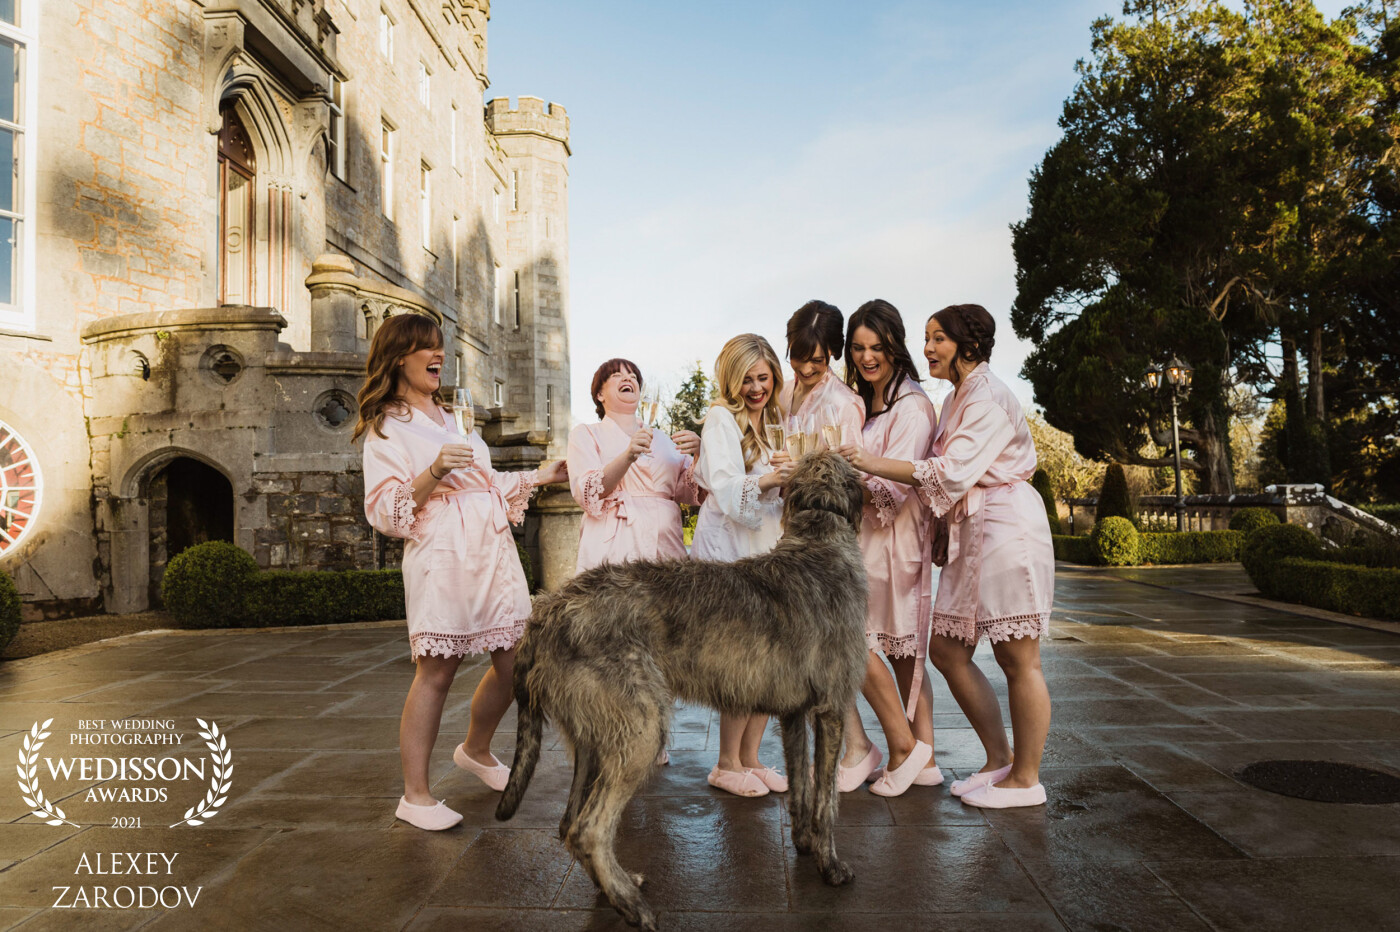 Roisin, Irish wolfhound, Markree Castle doggie, decided to join Sarah's morning Shamp-Shamp party! So welcoming! She was actually liking the Champagne from the girls galsses!